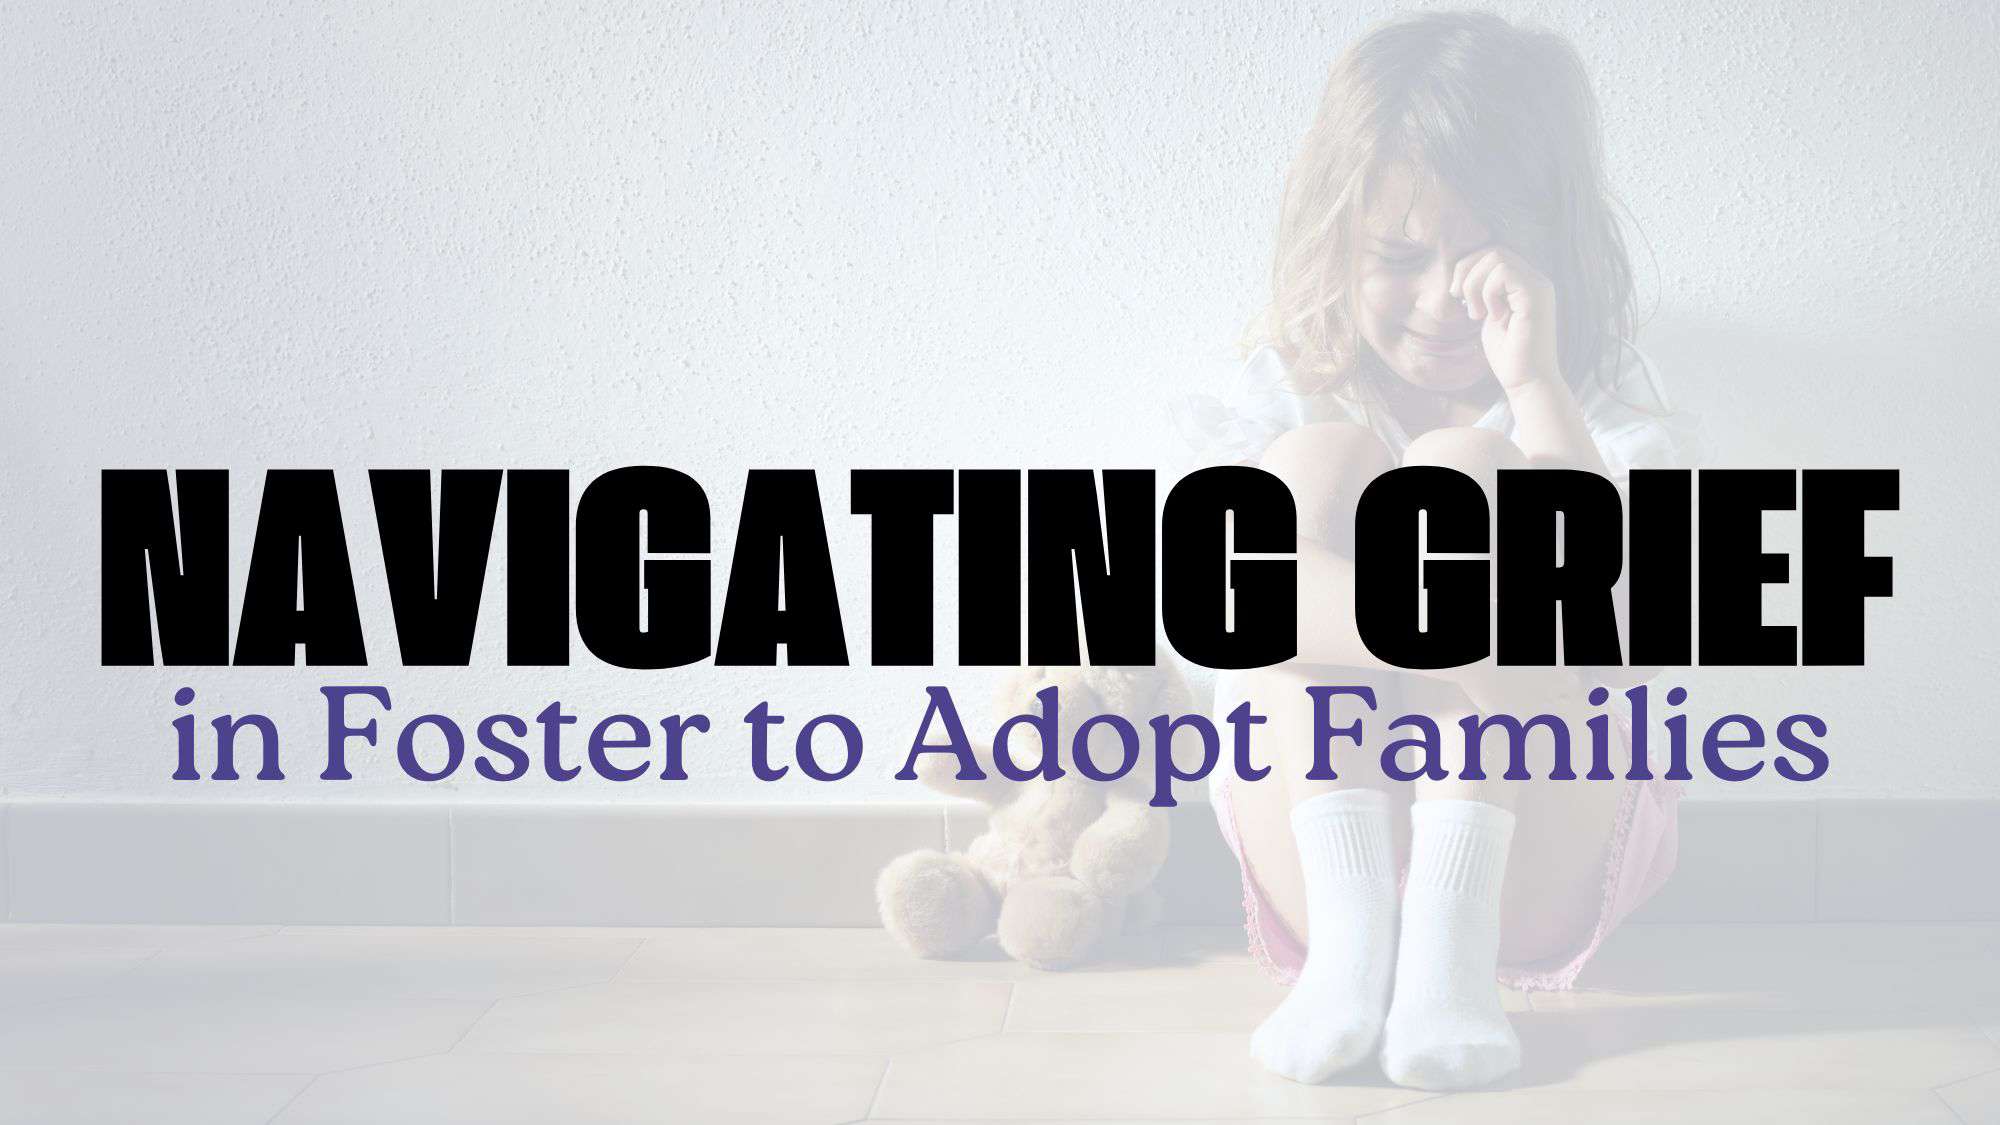 Navigating Grief in Foster to Adopt Families